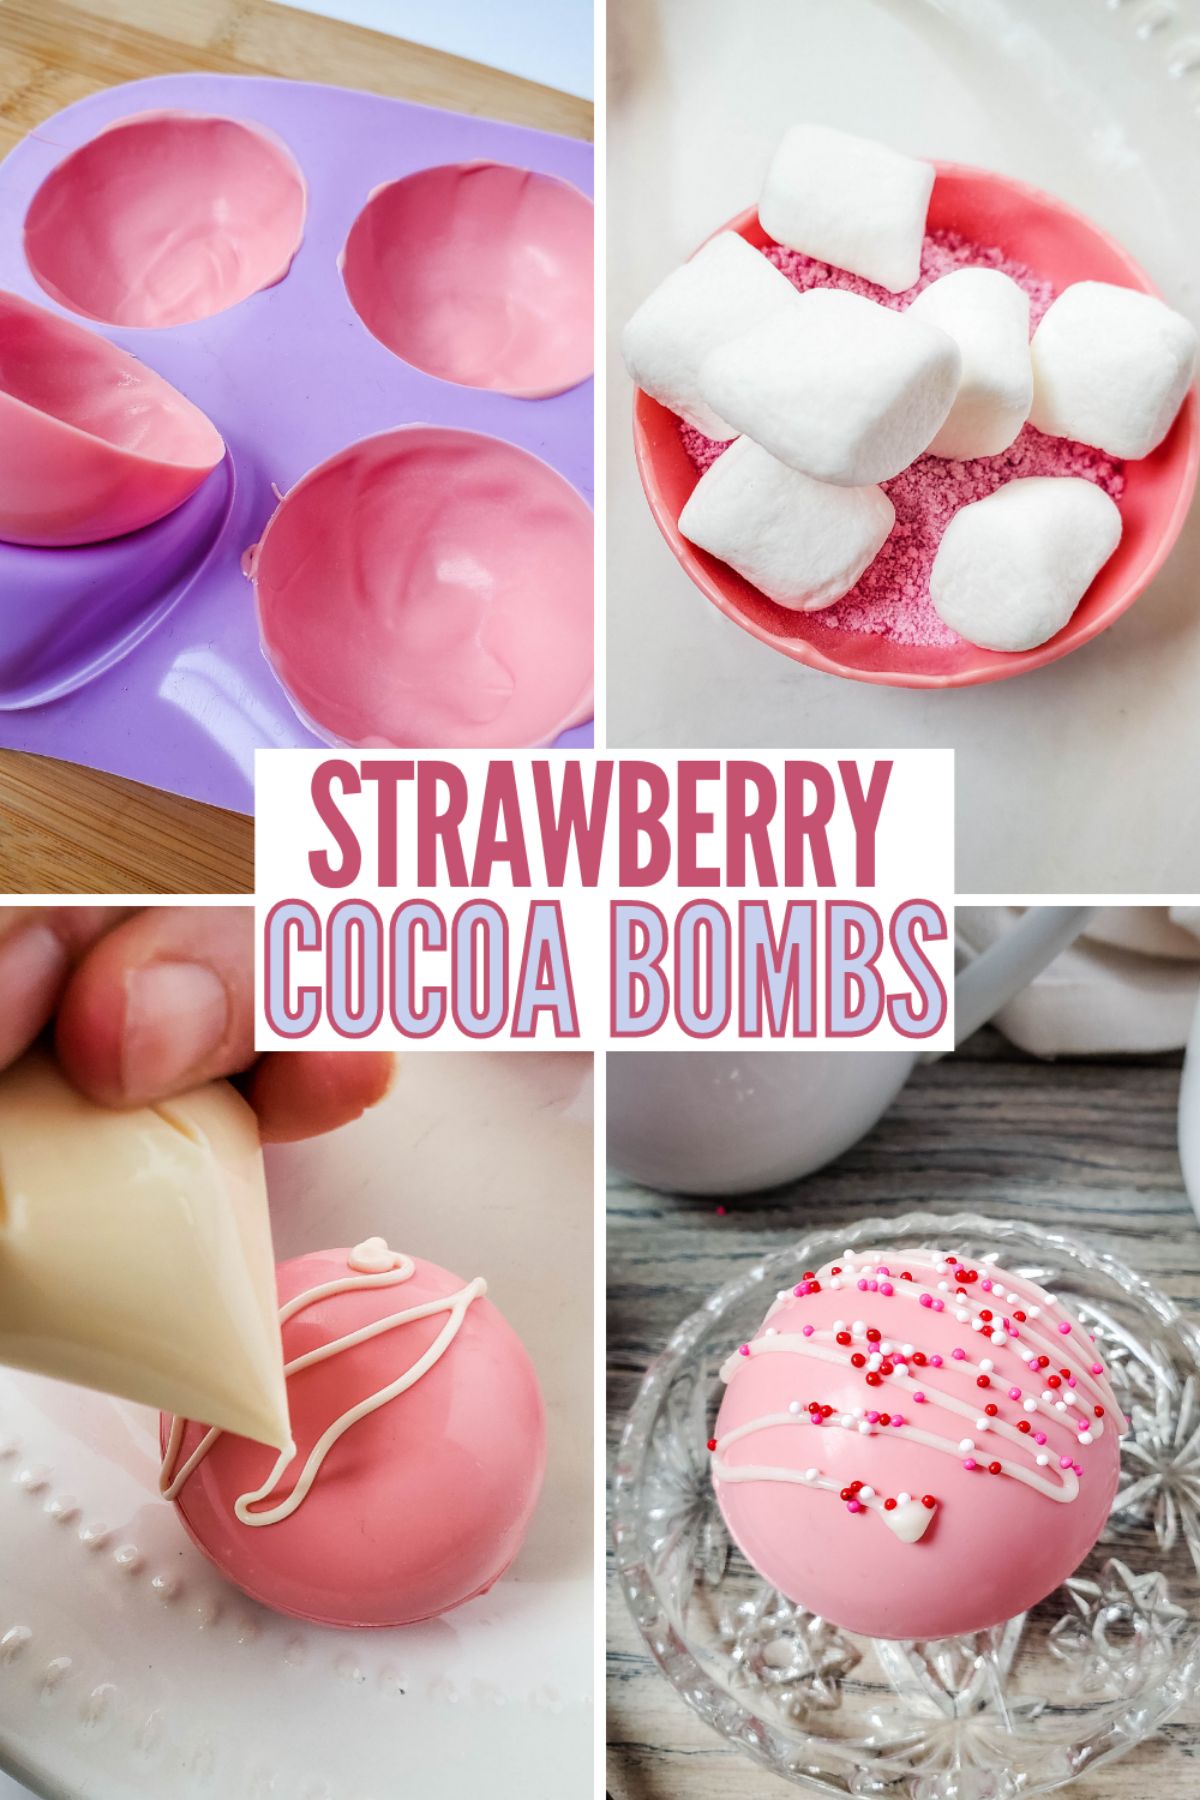 Strawberry Hot Cocoa Bombs are sweet and creamy with a tasty strawberry flavor. They're perfect for Valentine’s Day or a pink party. #strawberry #hotcocoabombs #valentinesday #winter #hotcocoa via @wondermomwannab